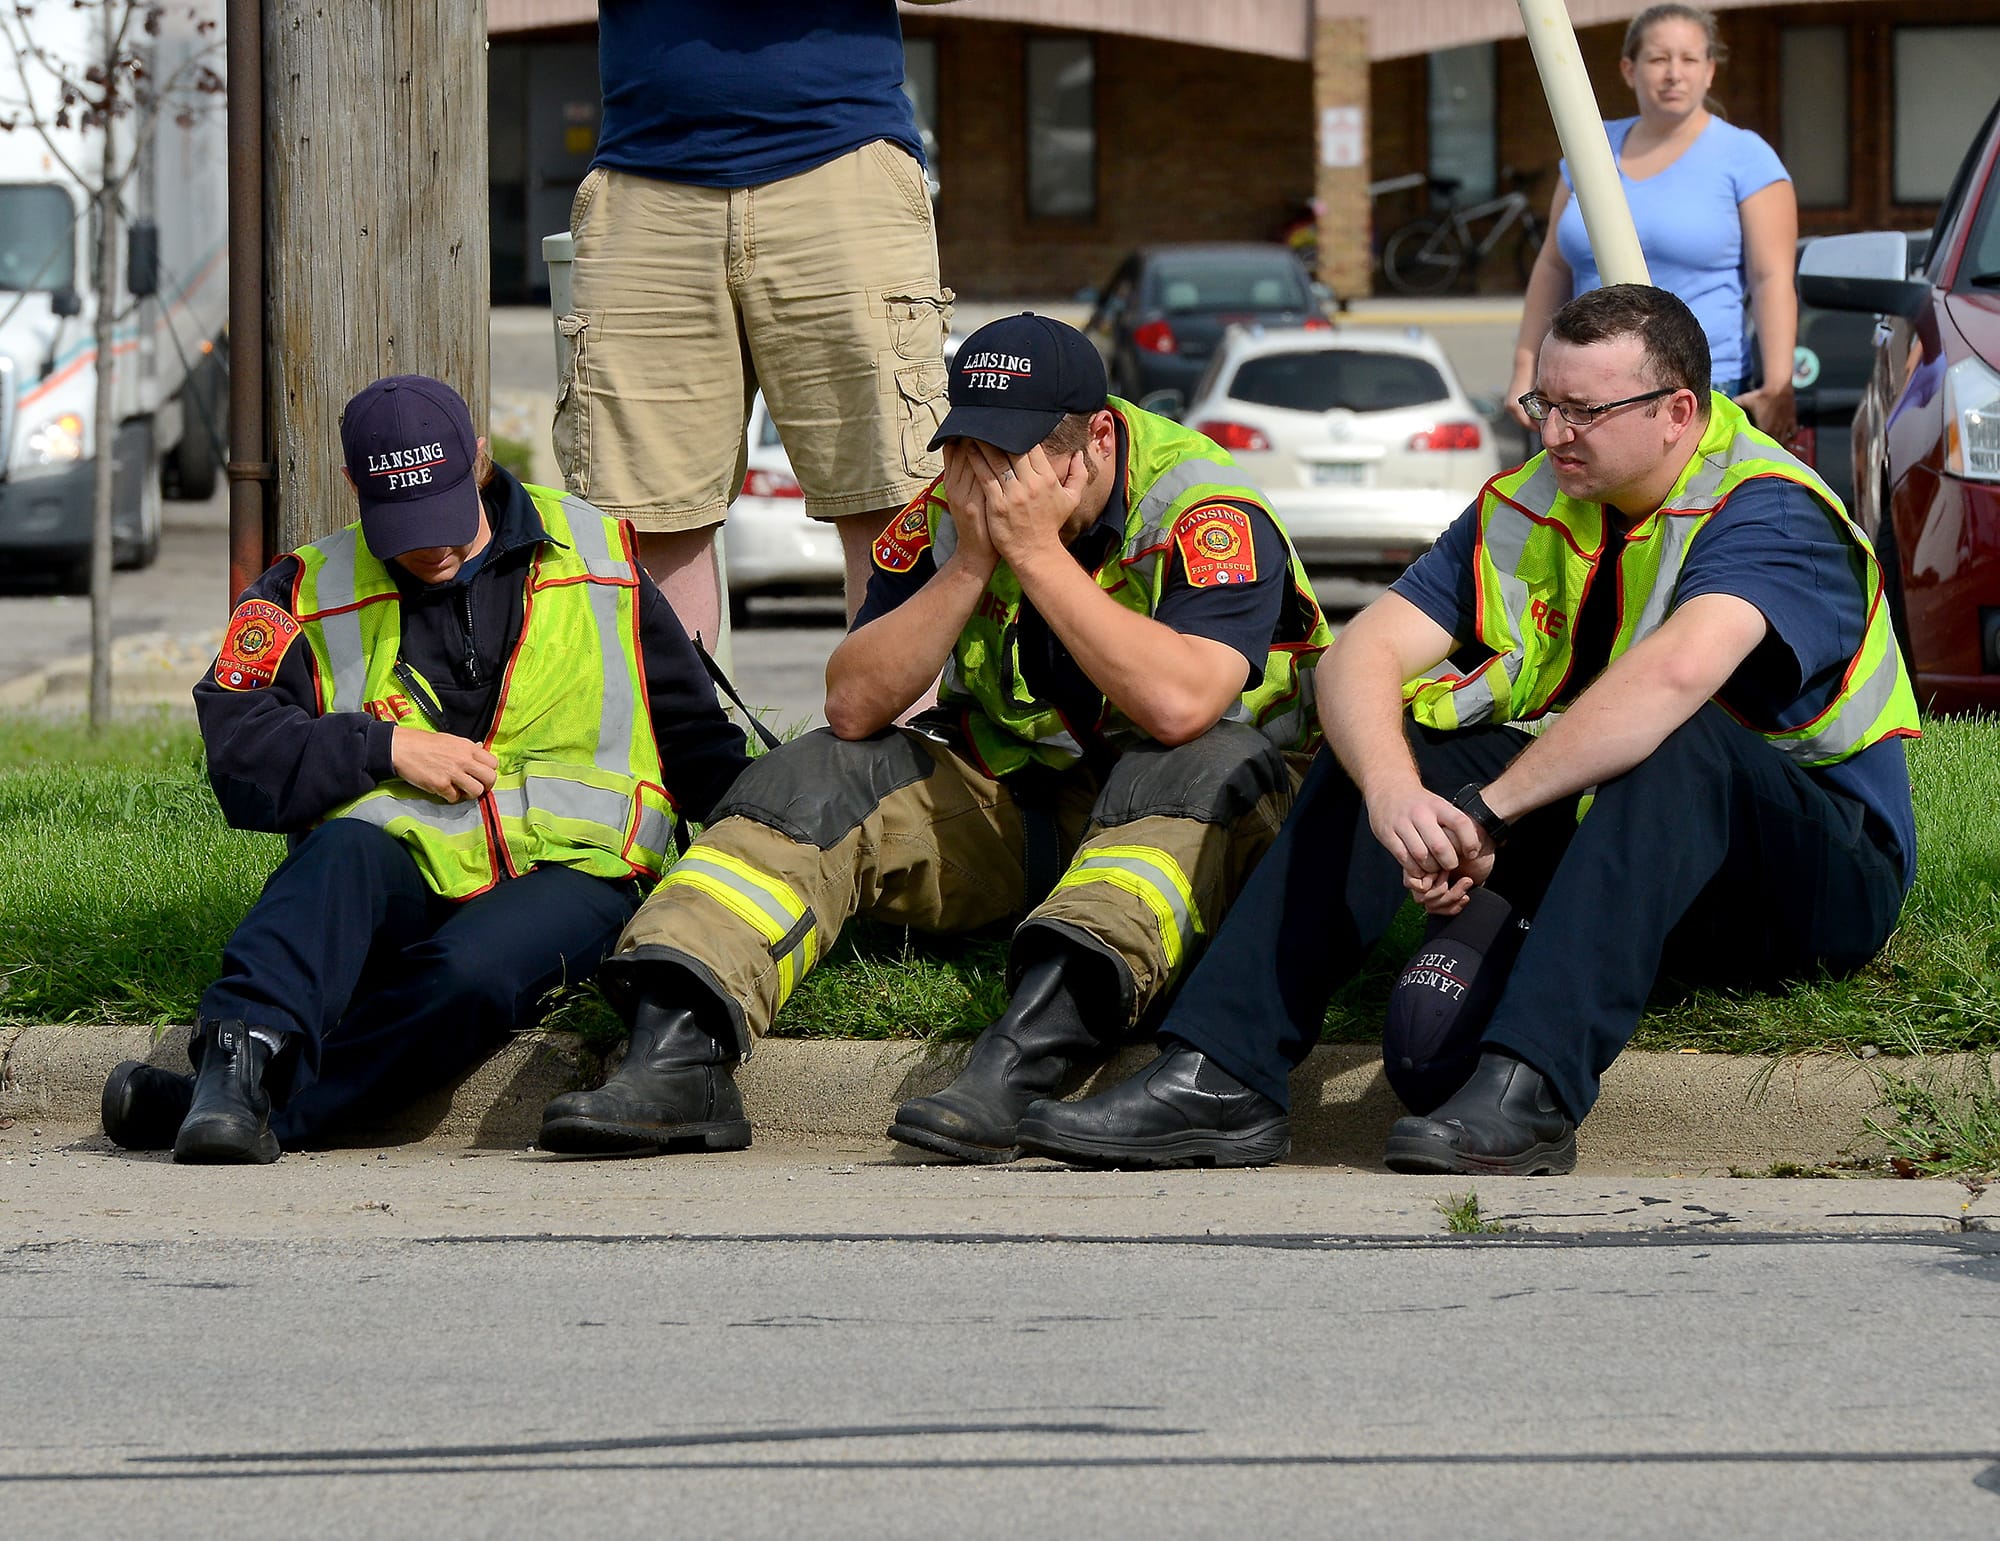 A firefighter puts his head in his hands as he and other firefighters sit on the curb on Cedar Street just north of Jolly Road on Wednesday in Lansing, Mich. Dennis Rodeman, a 35-year-old Lansing firefighter has died after being struck by a hit-and-run driver as he collected money for charity.